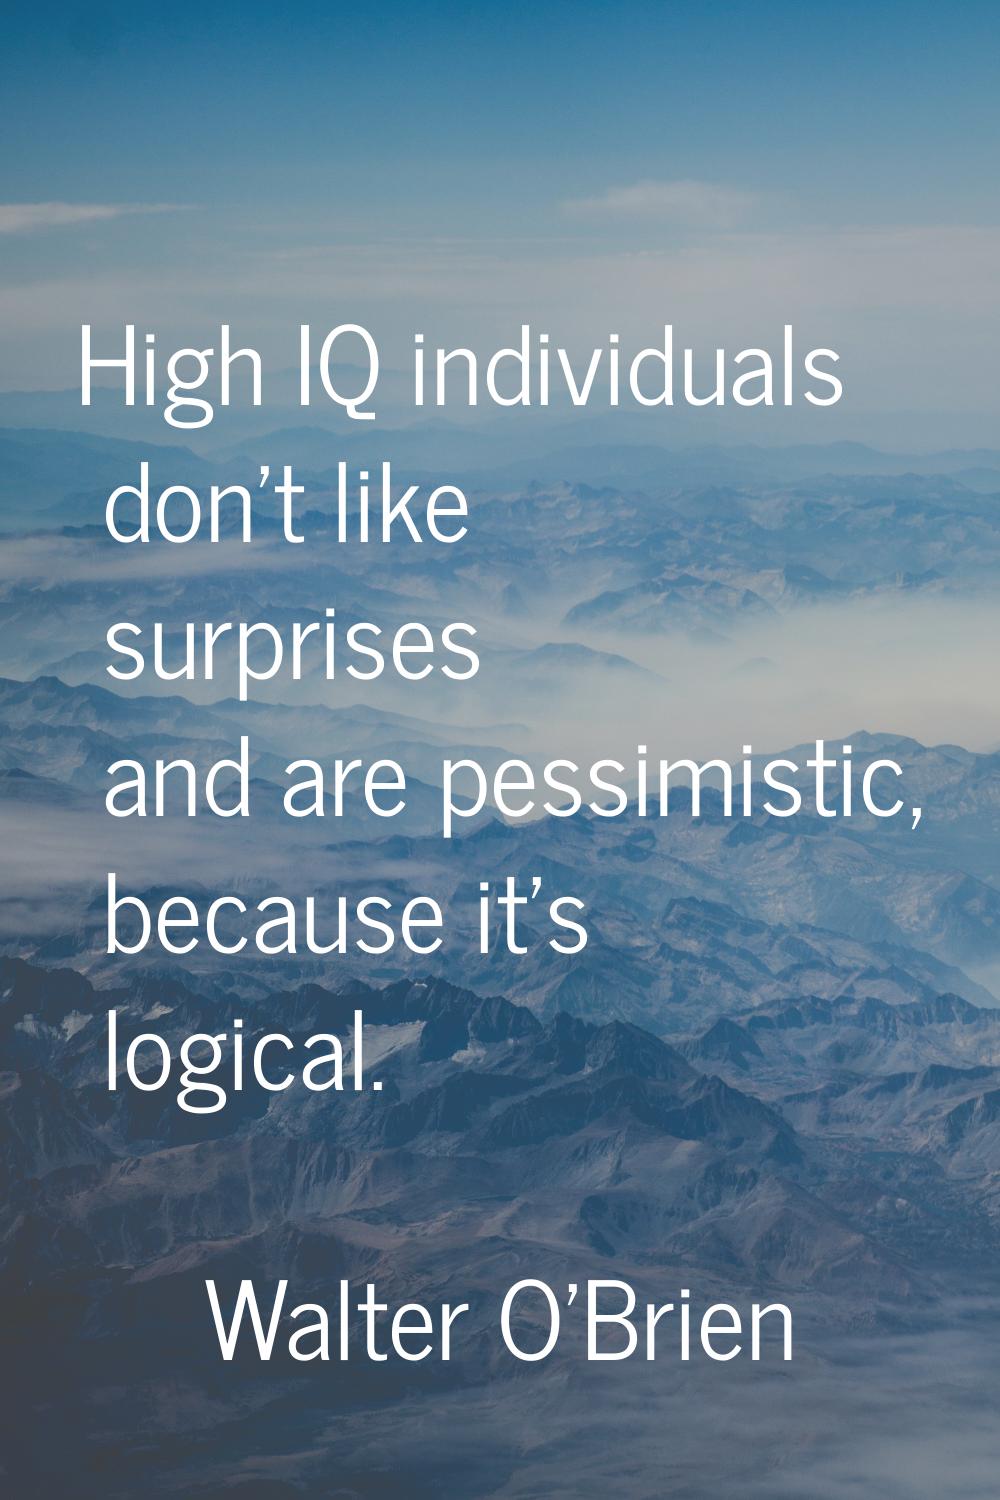 High IQ individuals don't like surprises and are pessimistic, because it's logical.